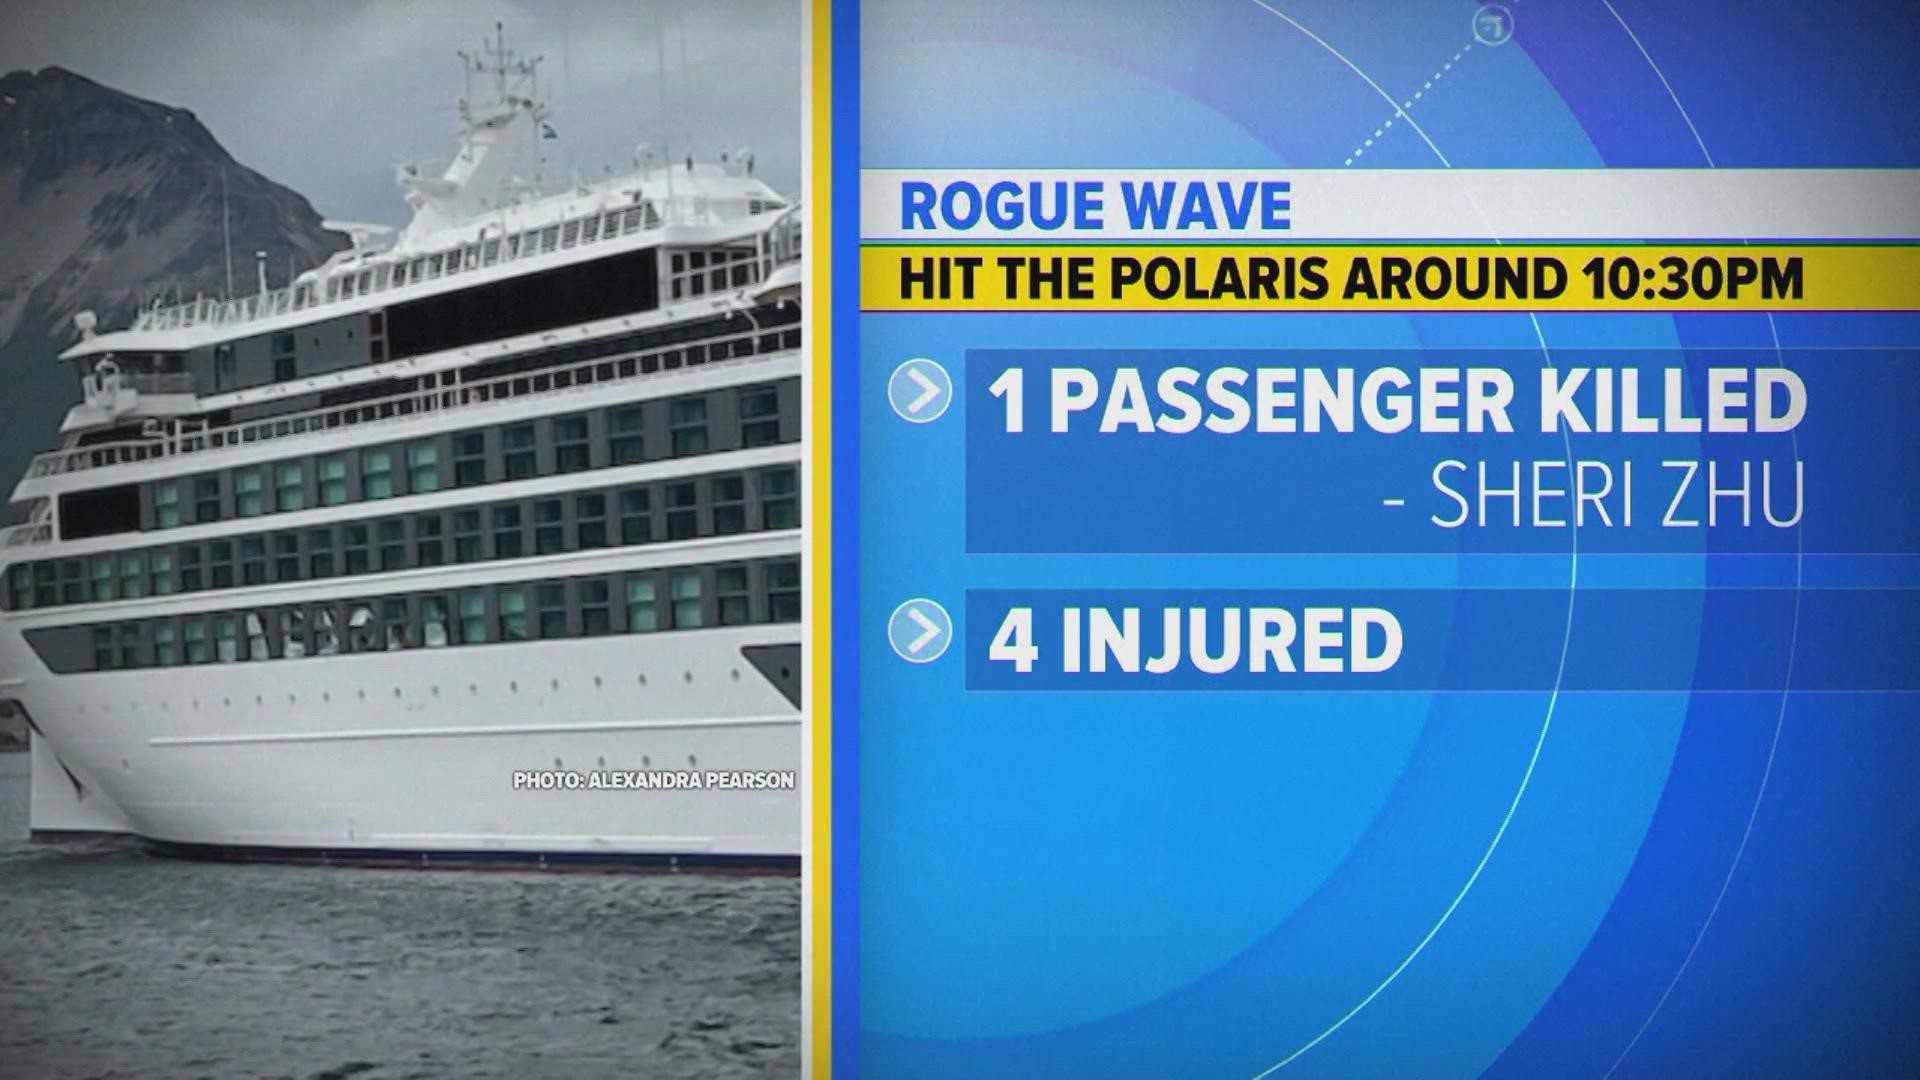 The victim killed in the deadly incident aboard the Viking Polaris cruise ship has been identified as a 62-year-old American woman.